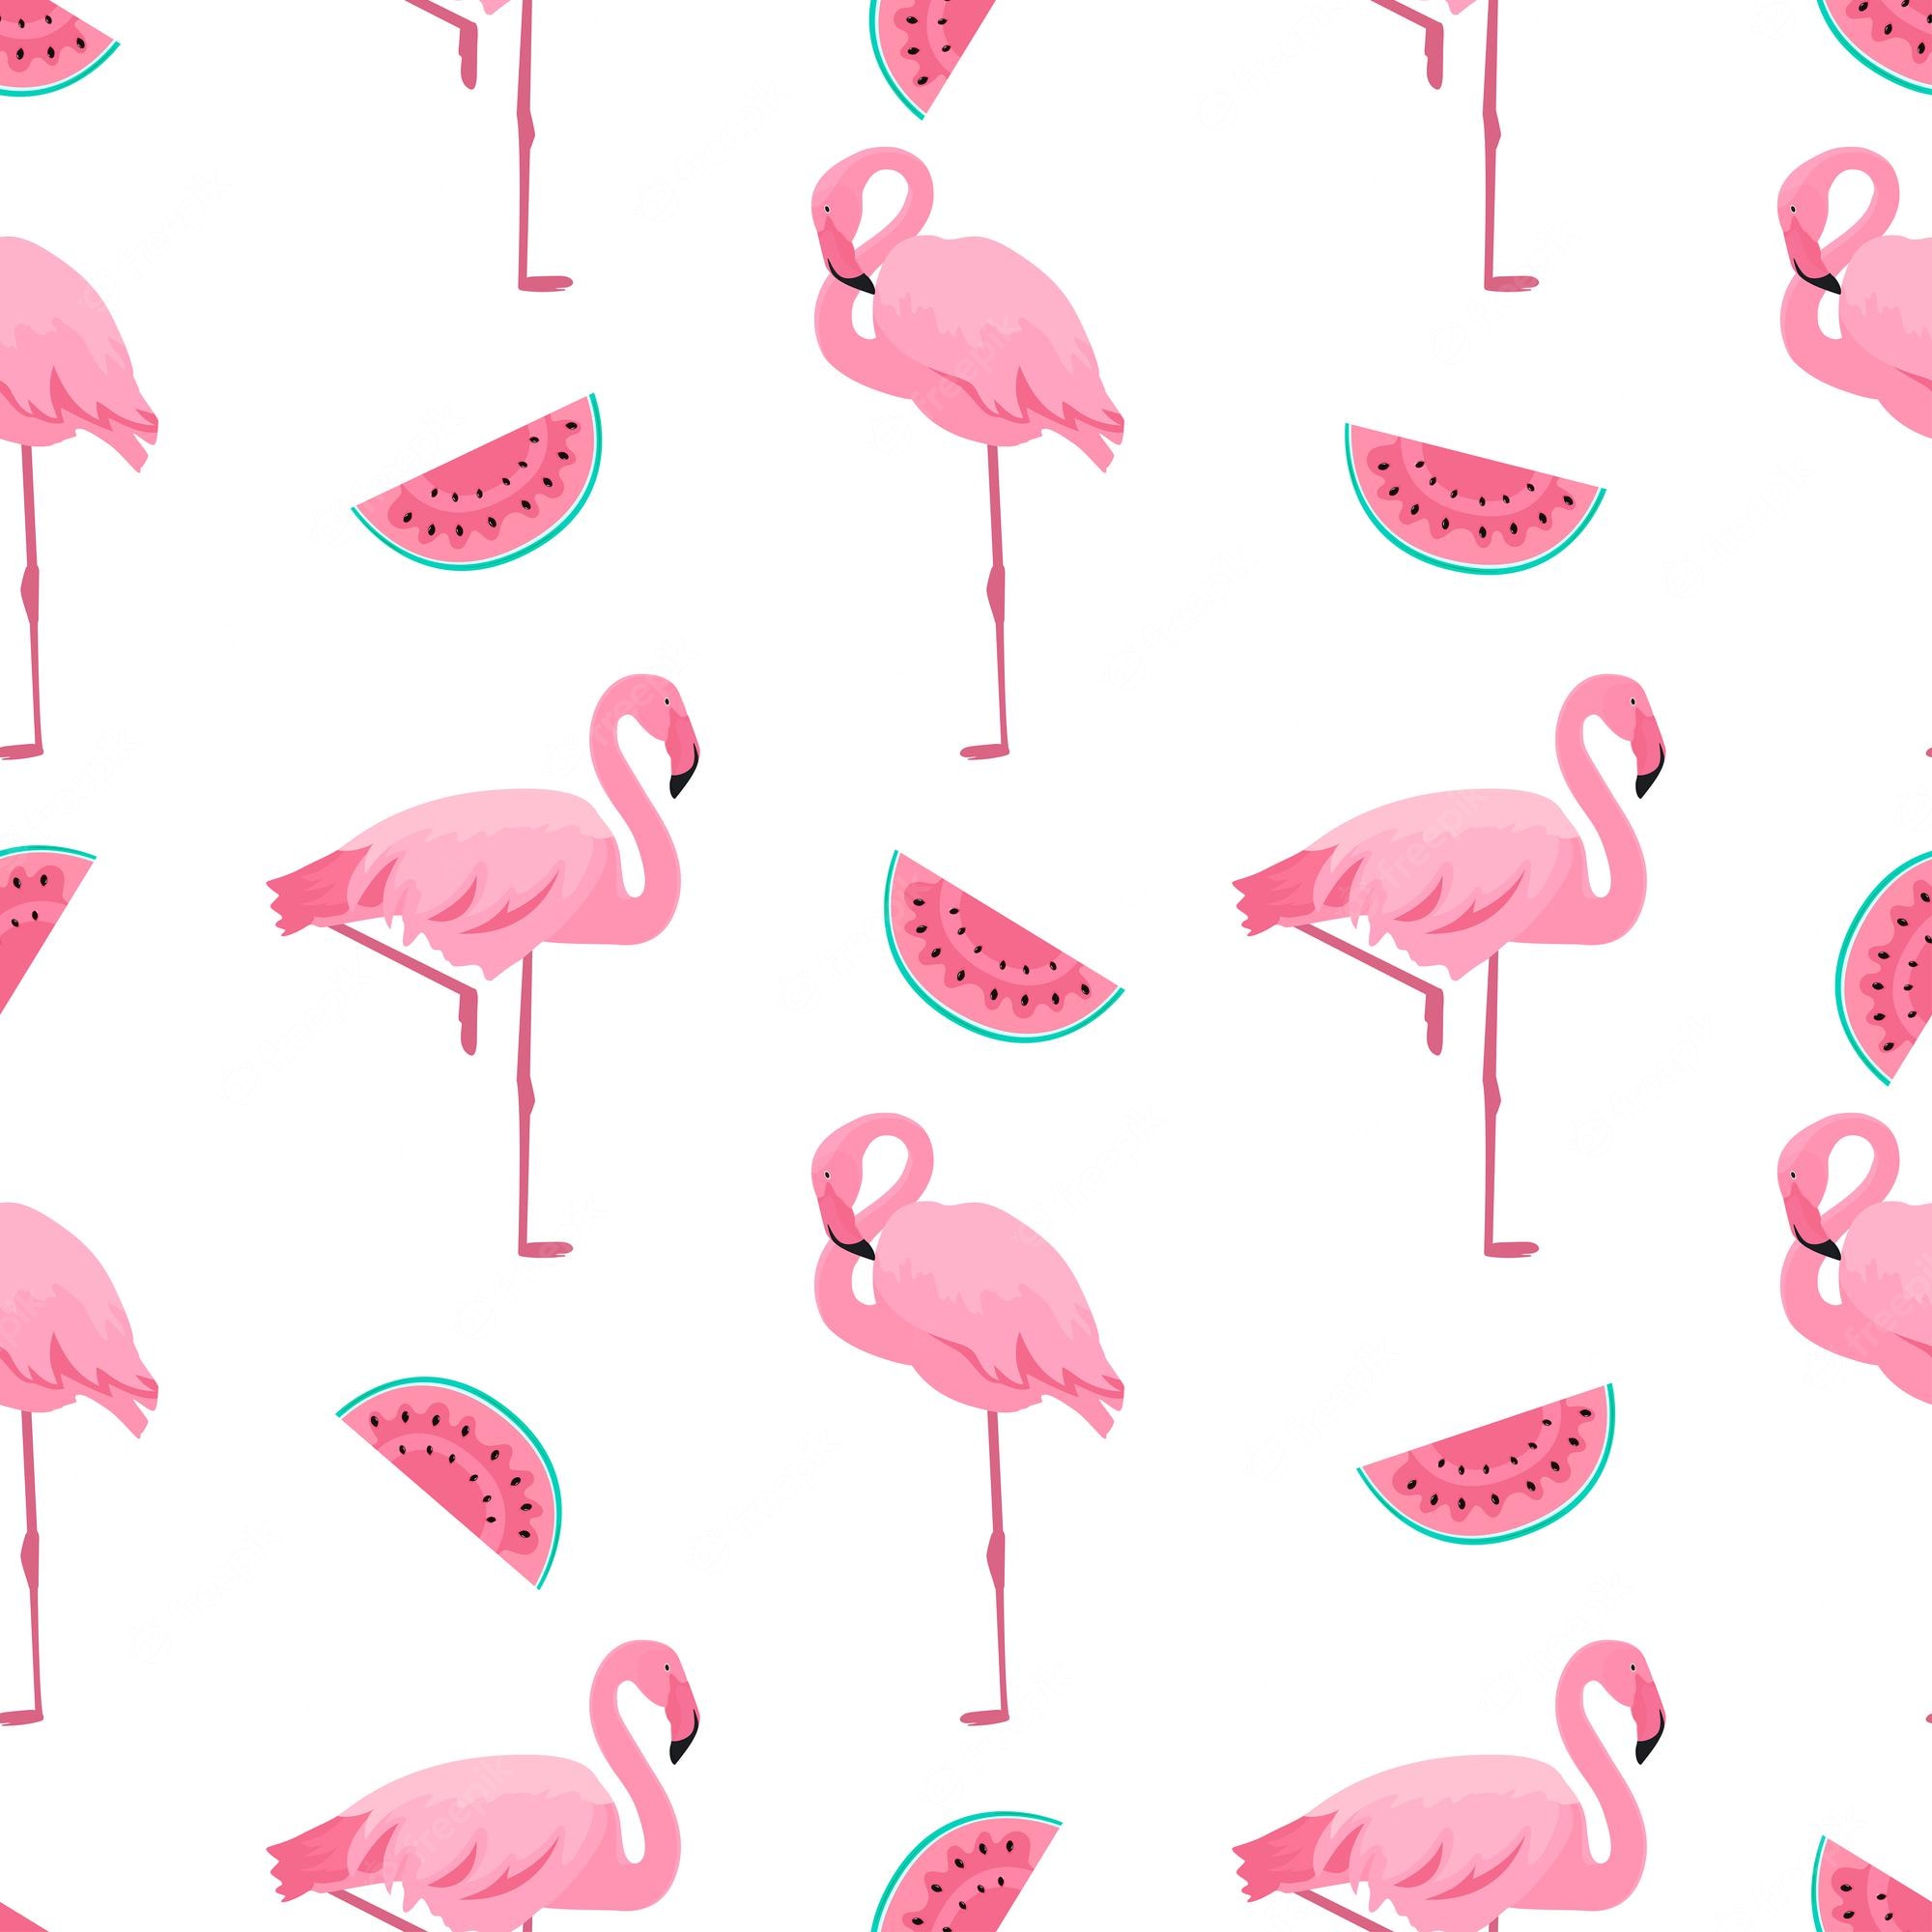 Premium Vector. Flamingo and watermelon. summer tropical seamless pattern. used for design surfaces, fabrics, textiles, packaging paper, wallpaper